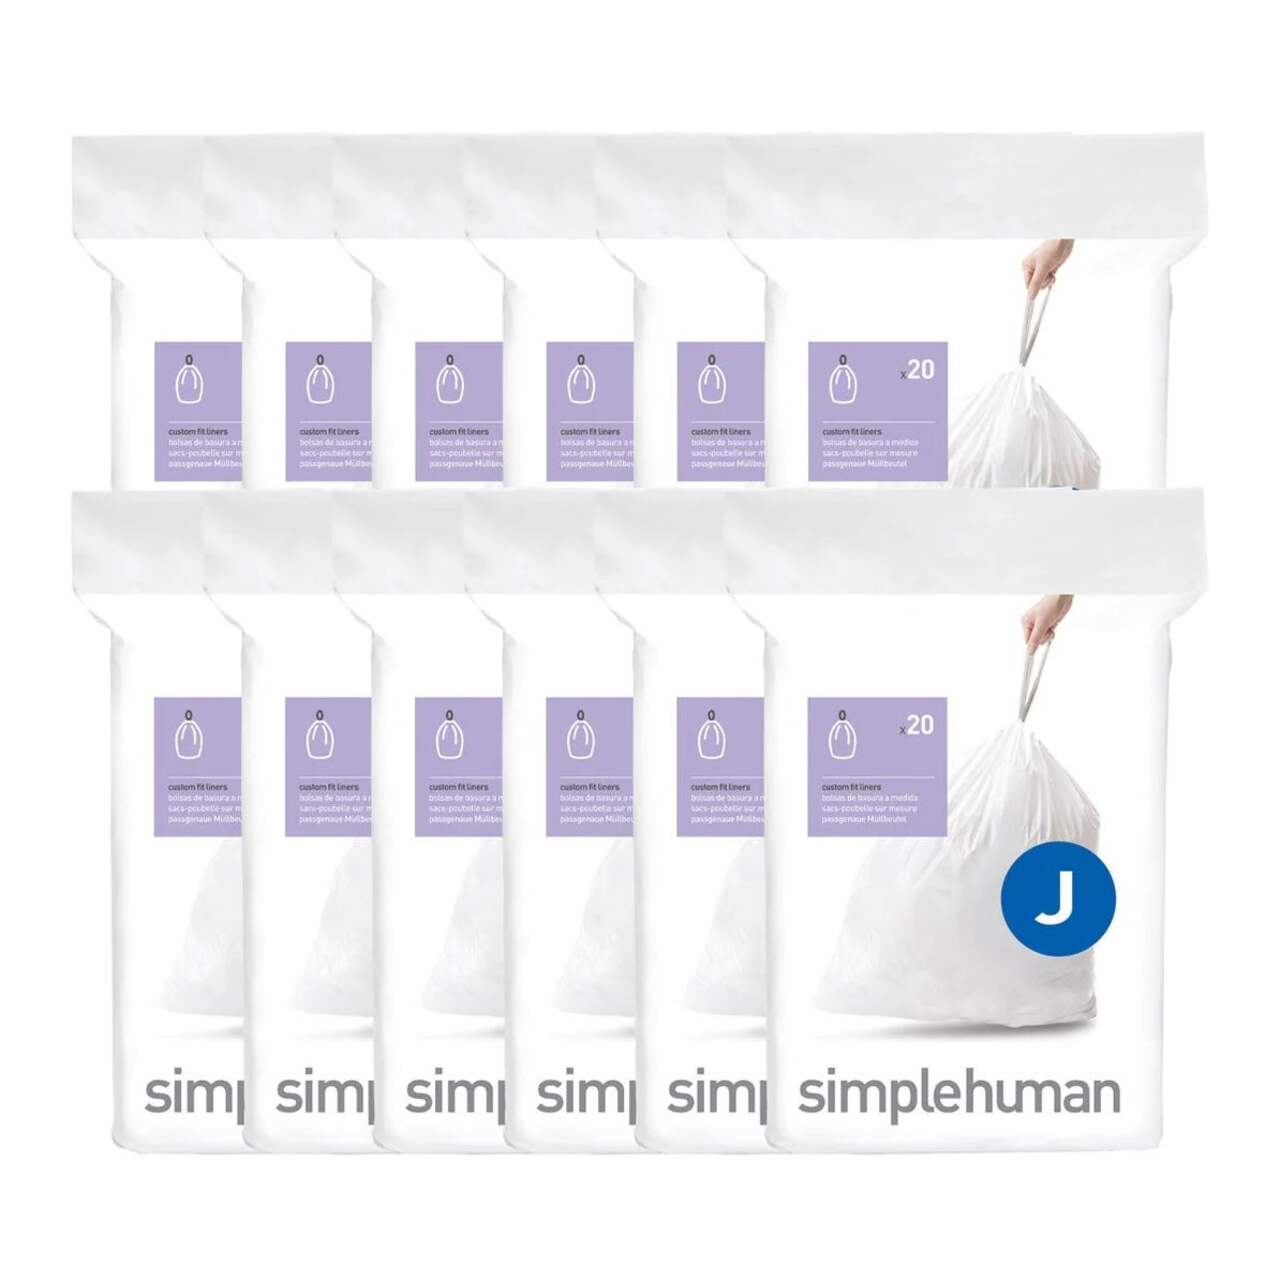 https://media-www.canadiantire.ca/product/living/cleaning/refuse-bags/1423304/simplehuman-liner-j-40-litre-4baf24b4-3b8f-44aa-9bcc-66dc2340e0bd-jpgrendition.jpg?imdensity=1&imwidth=1244&impolicy=mZoom